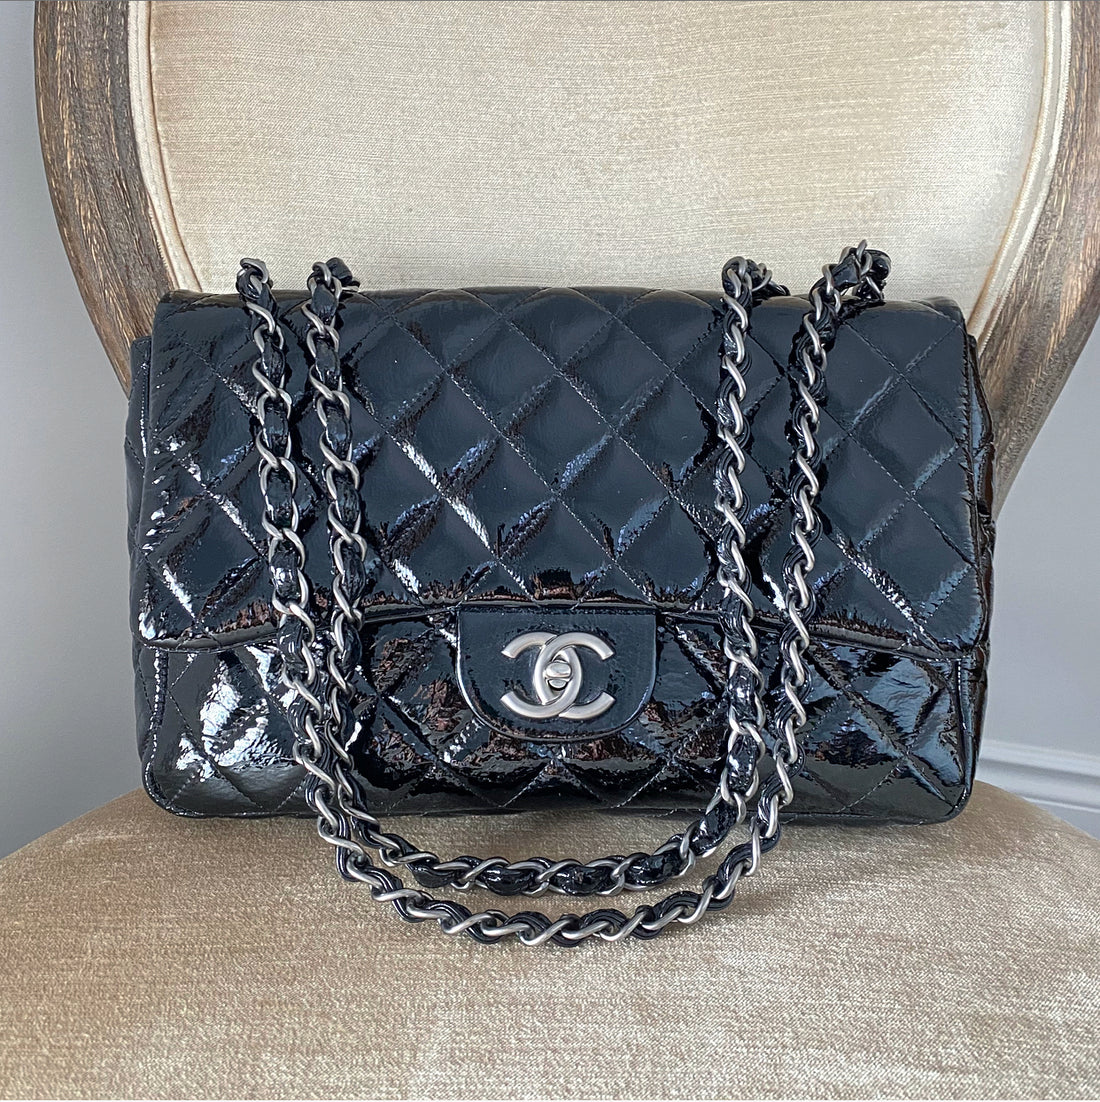 2008 Chanel Bags - 119 For Sale on 1stDibs  chanel 2008, chanel bags 2008  collection, 2008 chanel classic flap